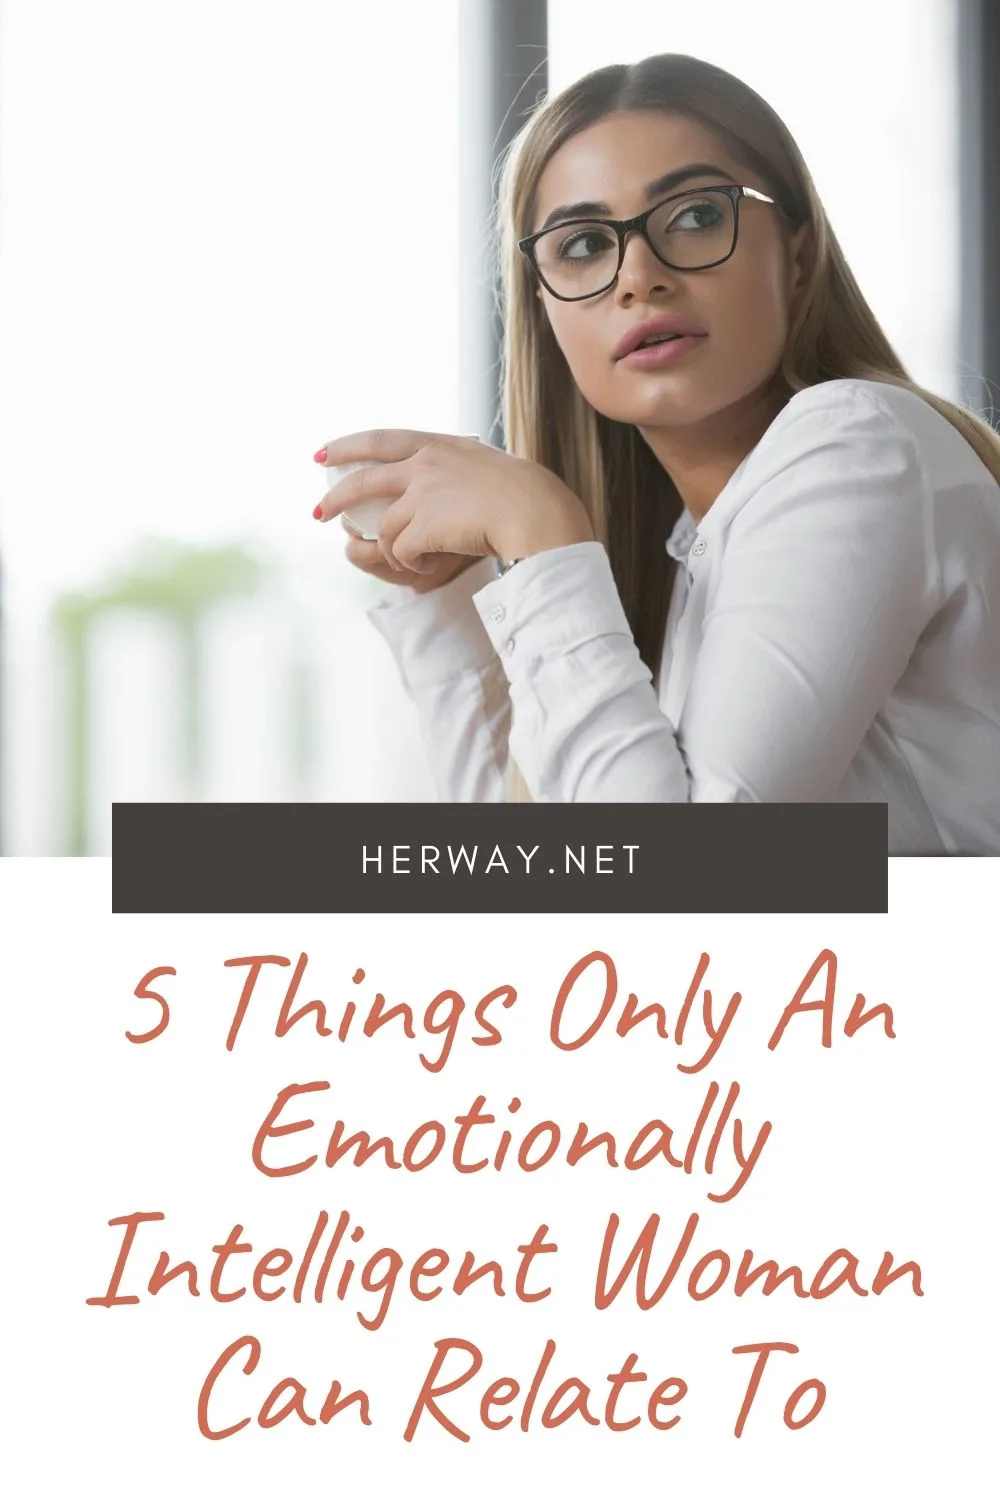 5 Things Only An Emotionally Intelligent Woman Can Relate To